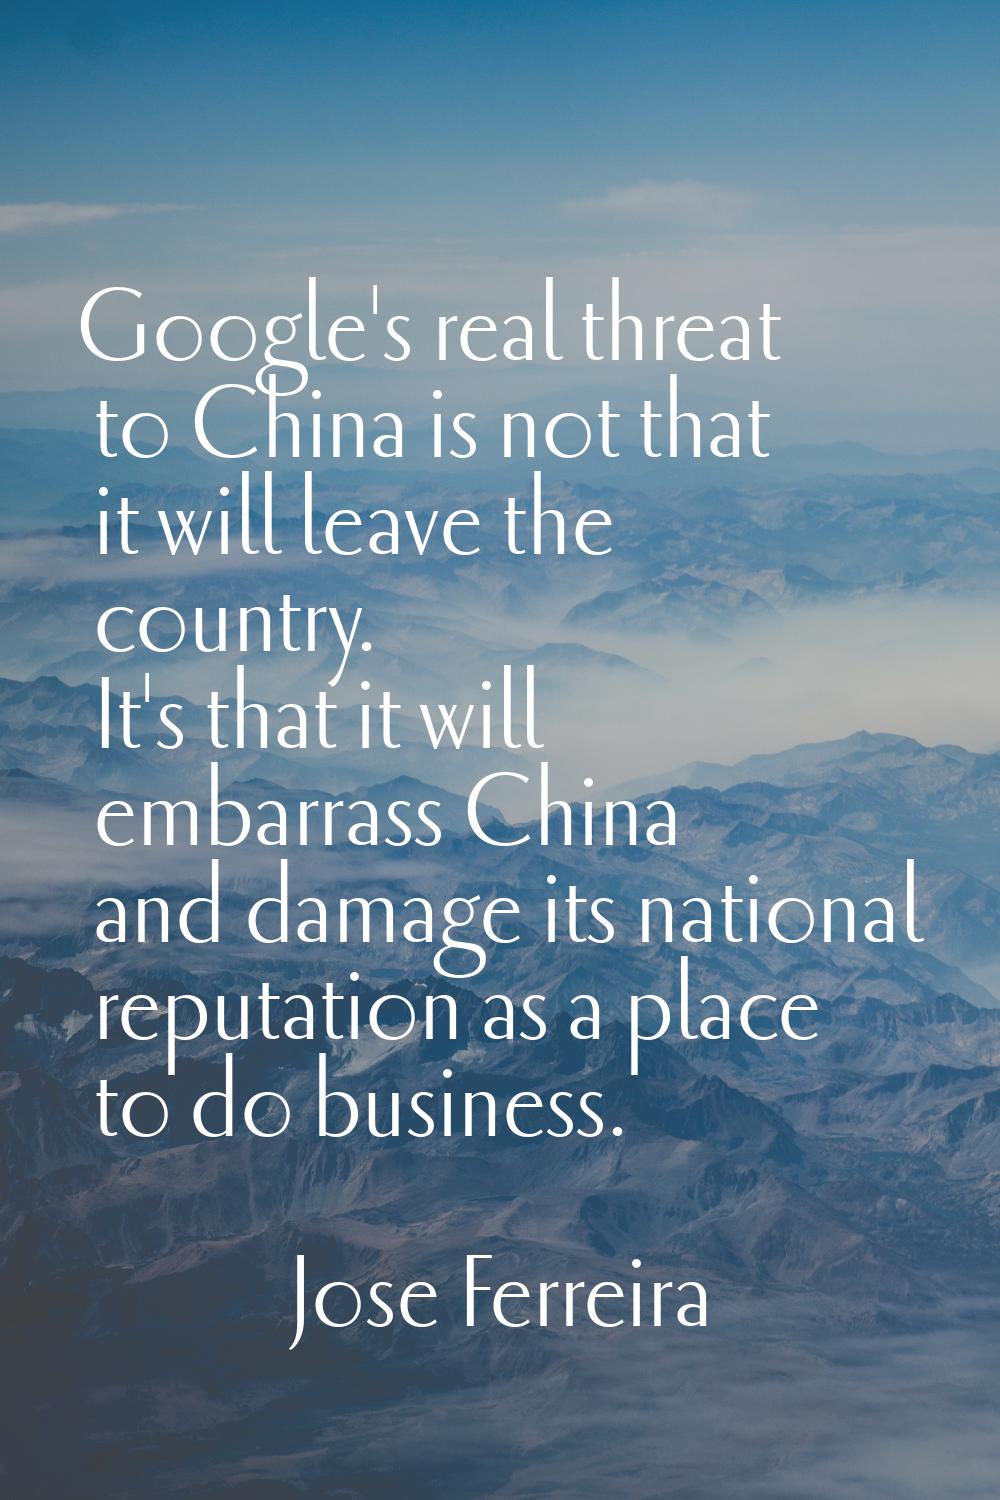 Google's real threat to China is not that it will leave the country. It's that it will embarrass Ch